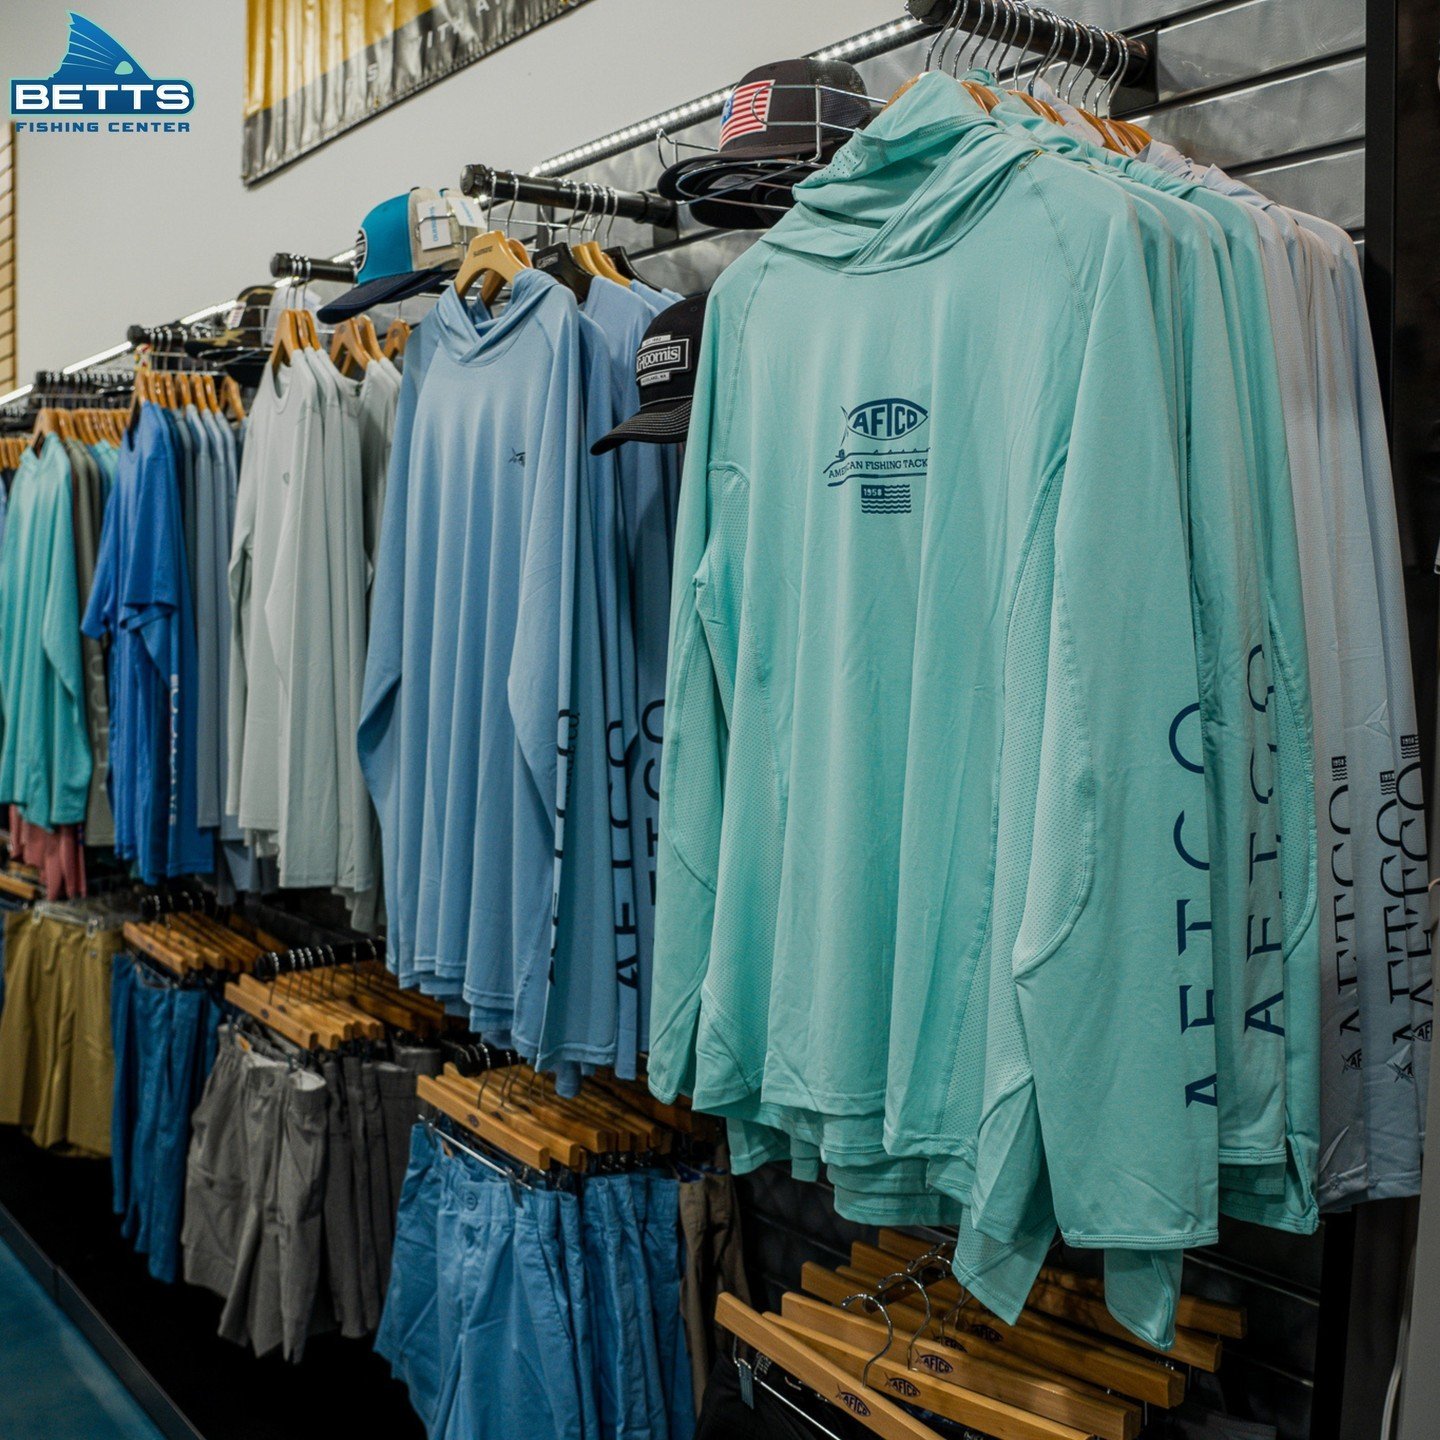 Stay stylish and protected from the sun with Betts Fishing Center's range of outdoor wear, featuring premium AFTCO gear. Whether you're casting lines or soaking up the scenery, they've got you covered with quality apparel designed for adventure. Visi